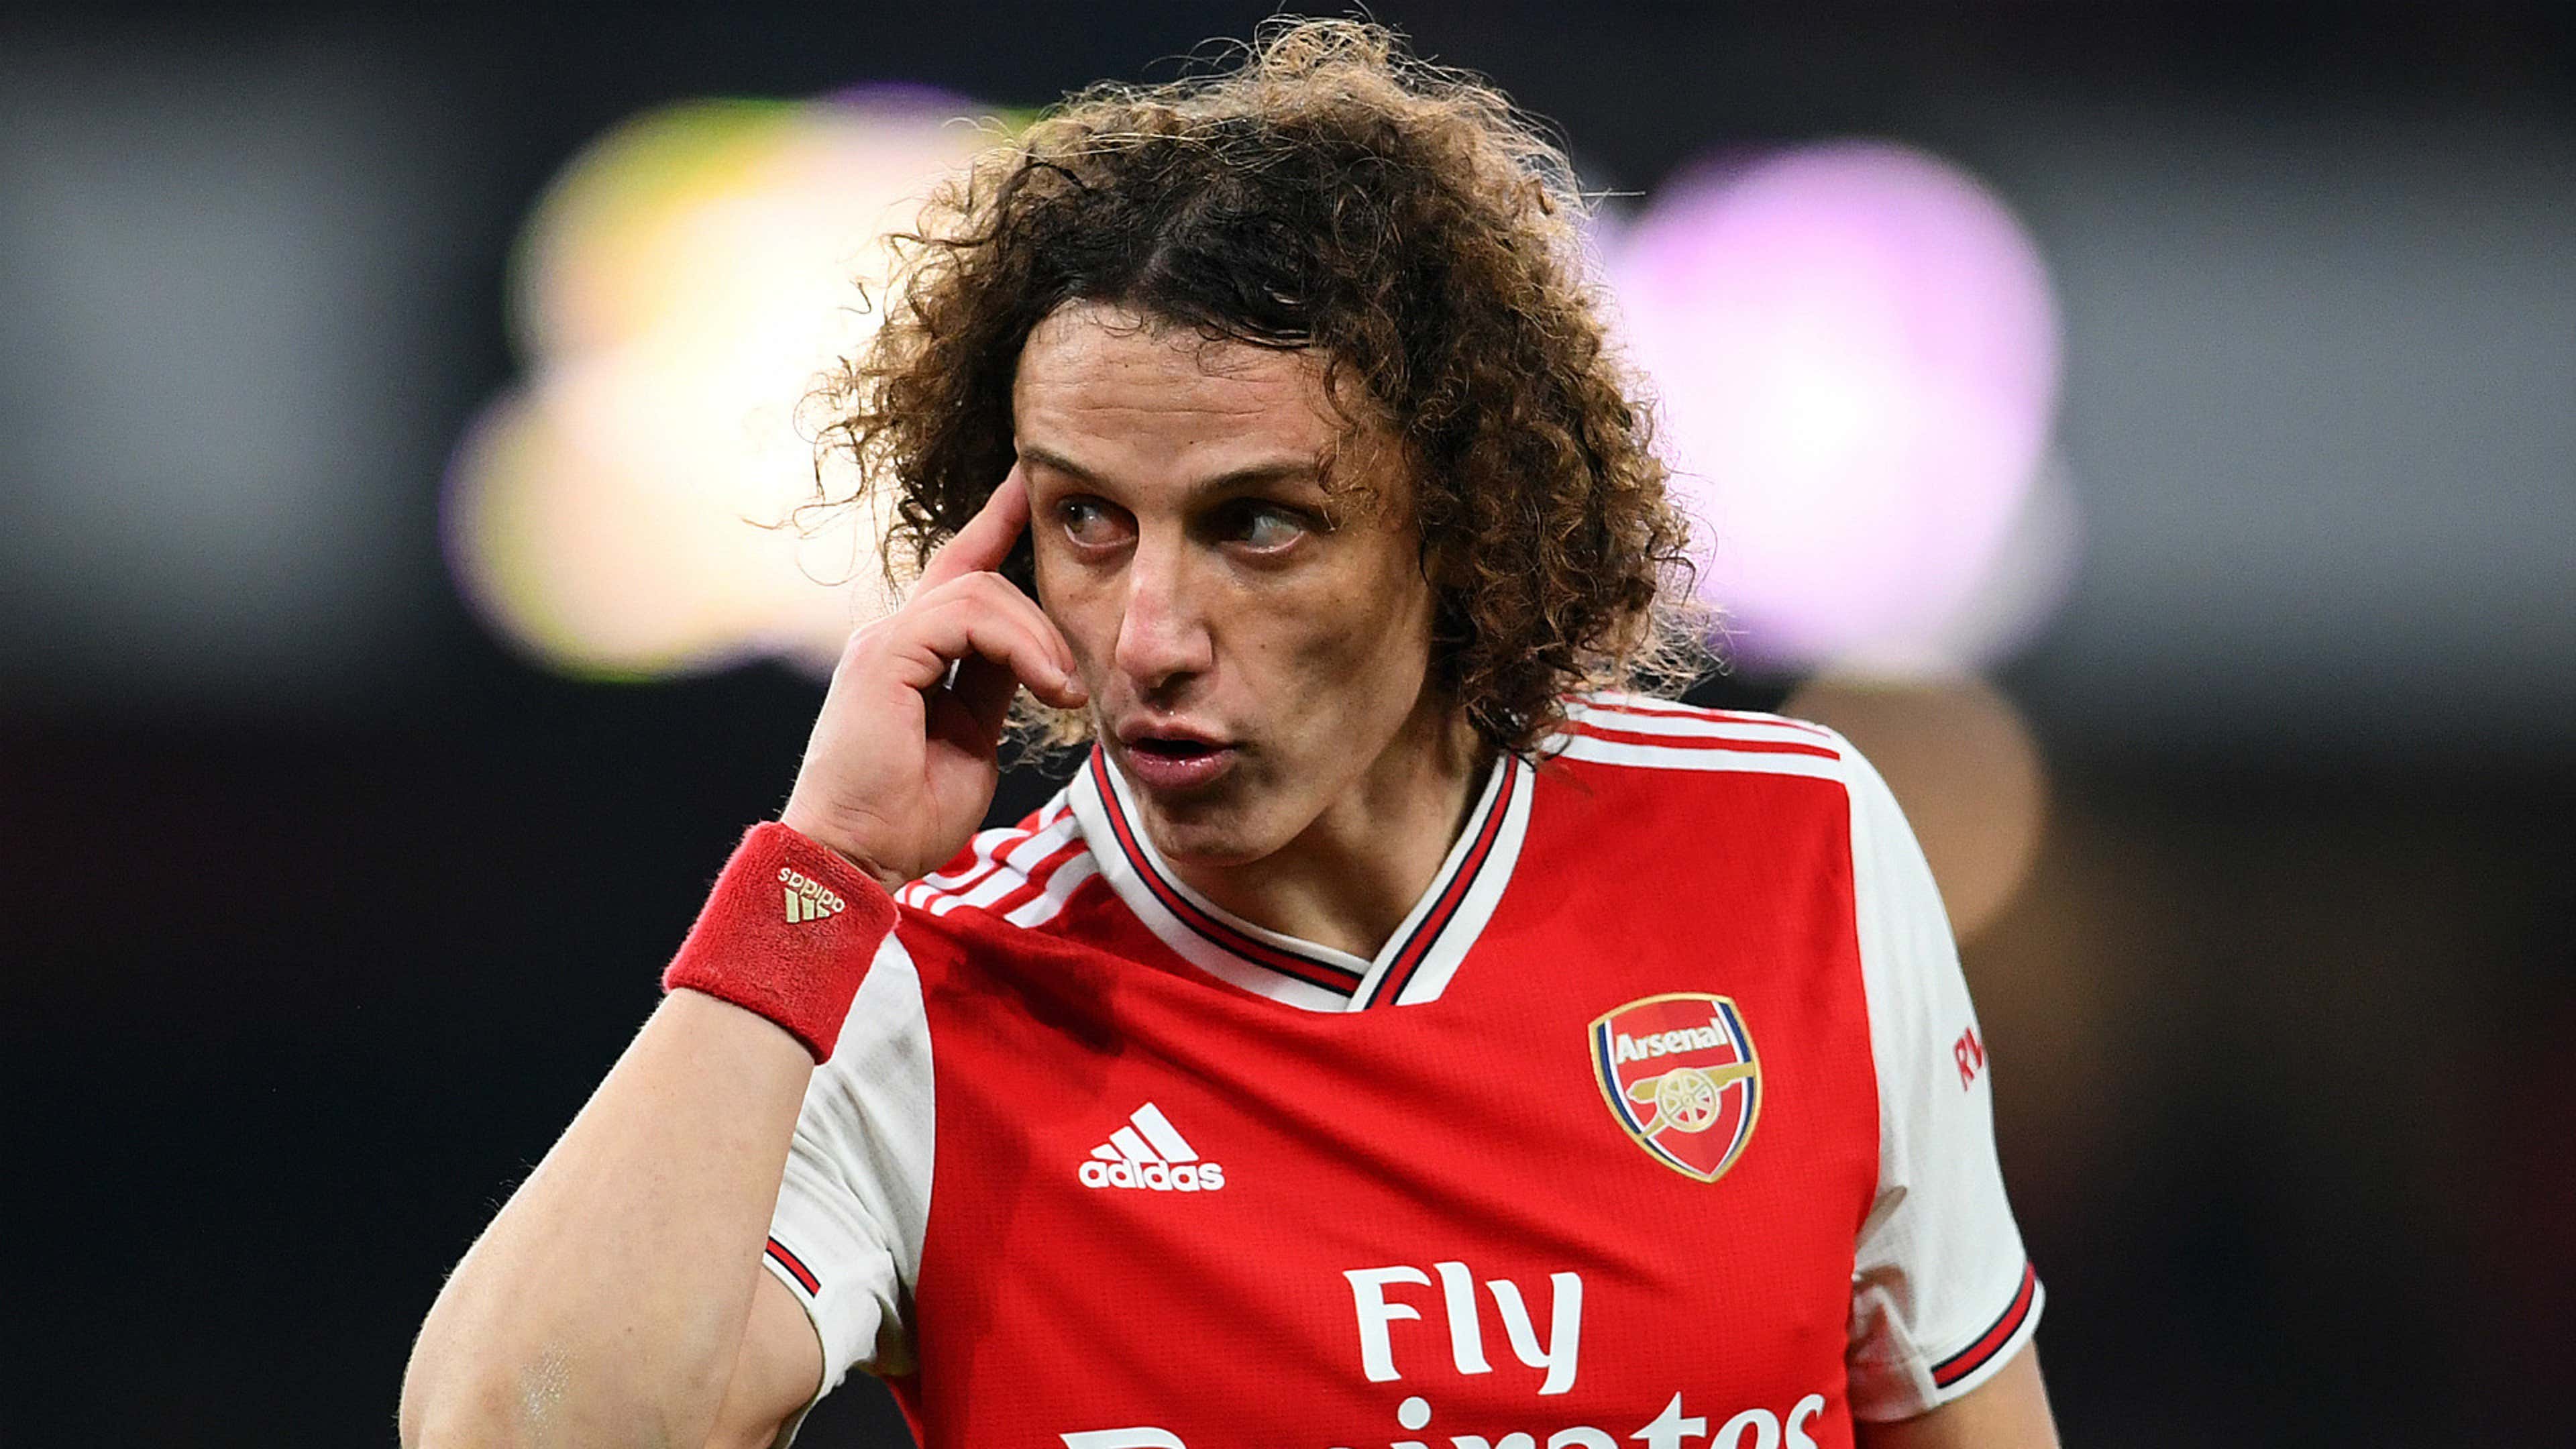 Why Arsenal and Arteta ignored the mistakes to extend Luiz's contract